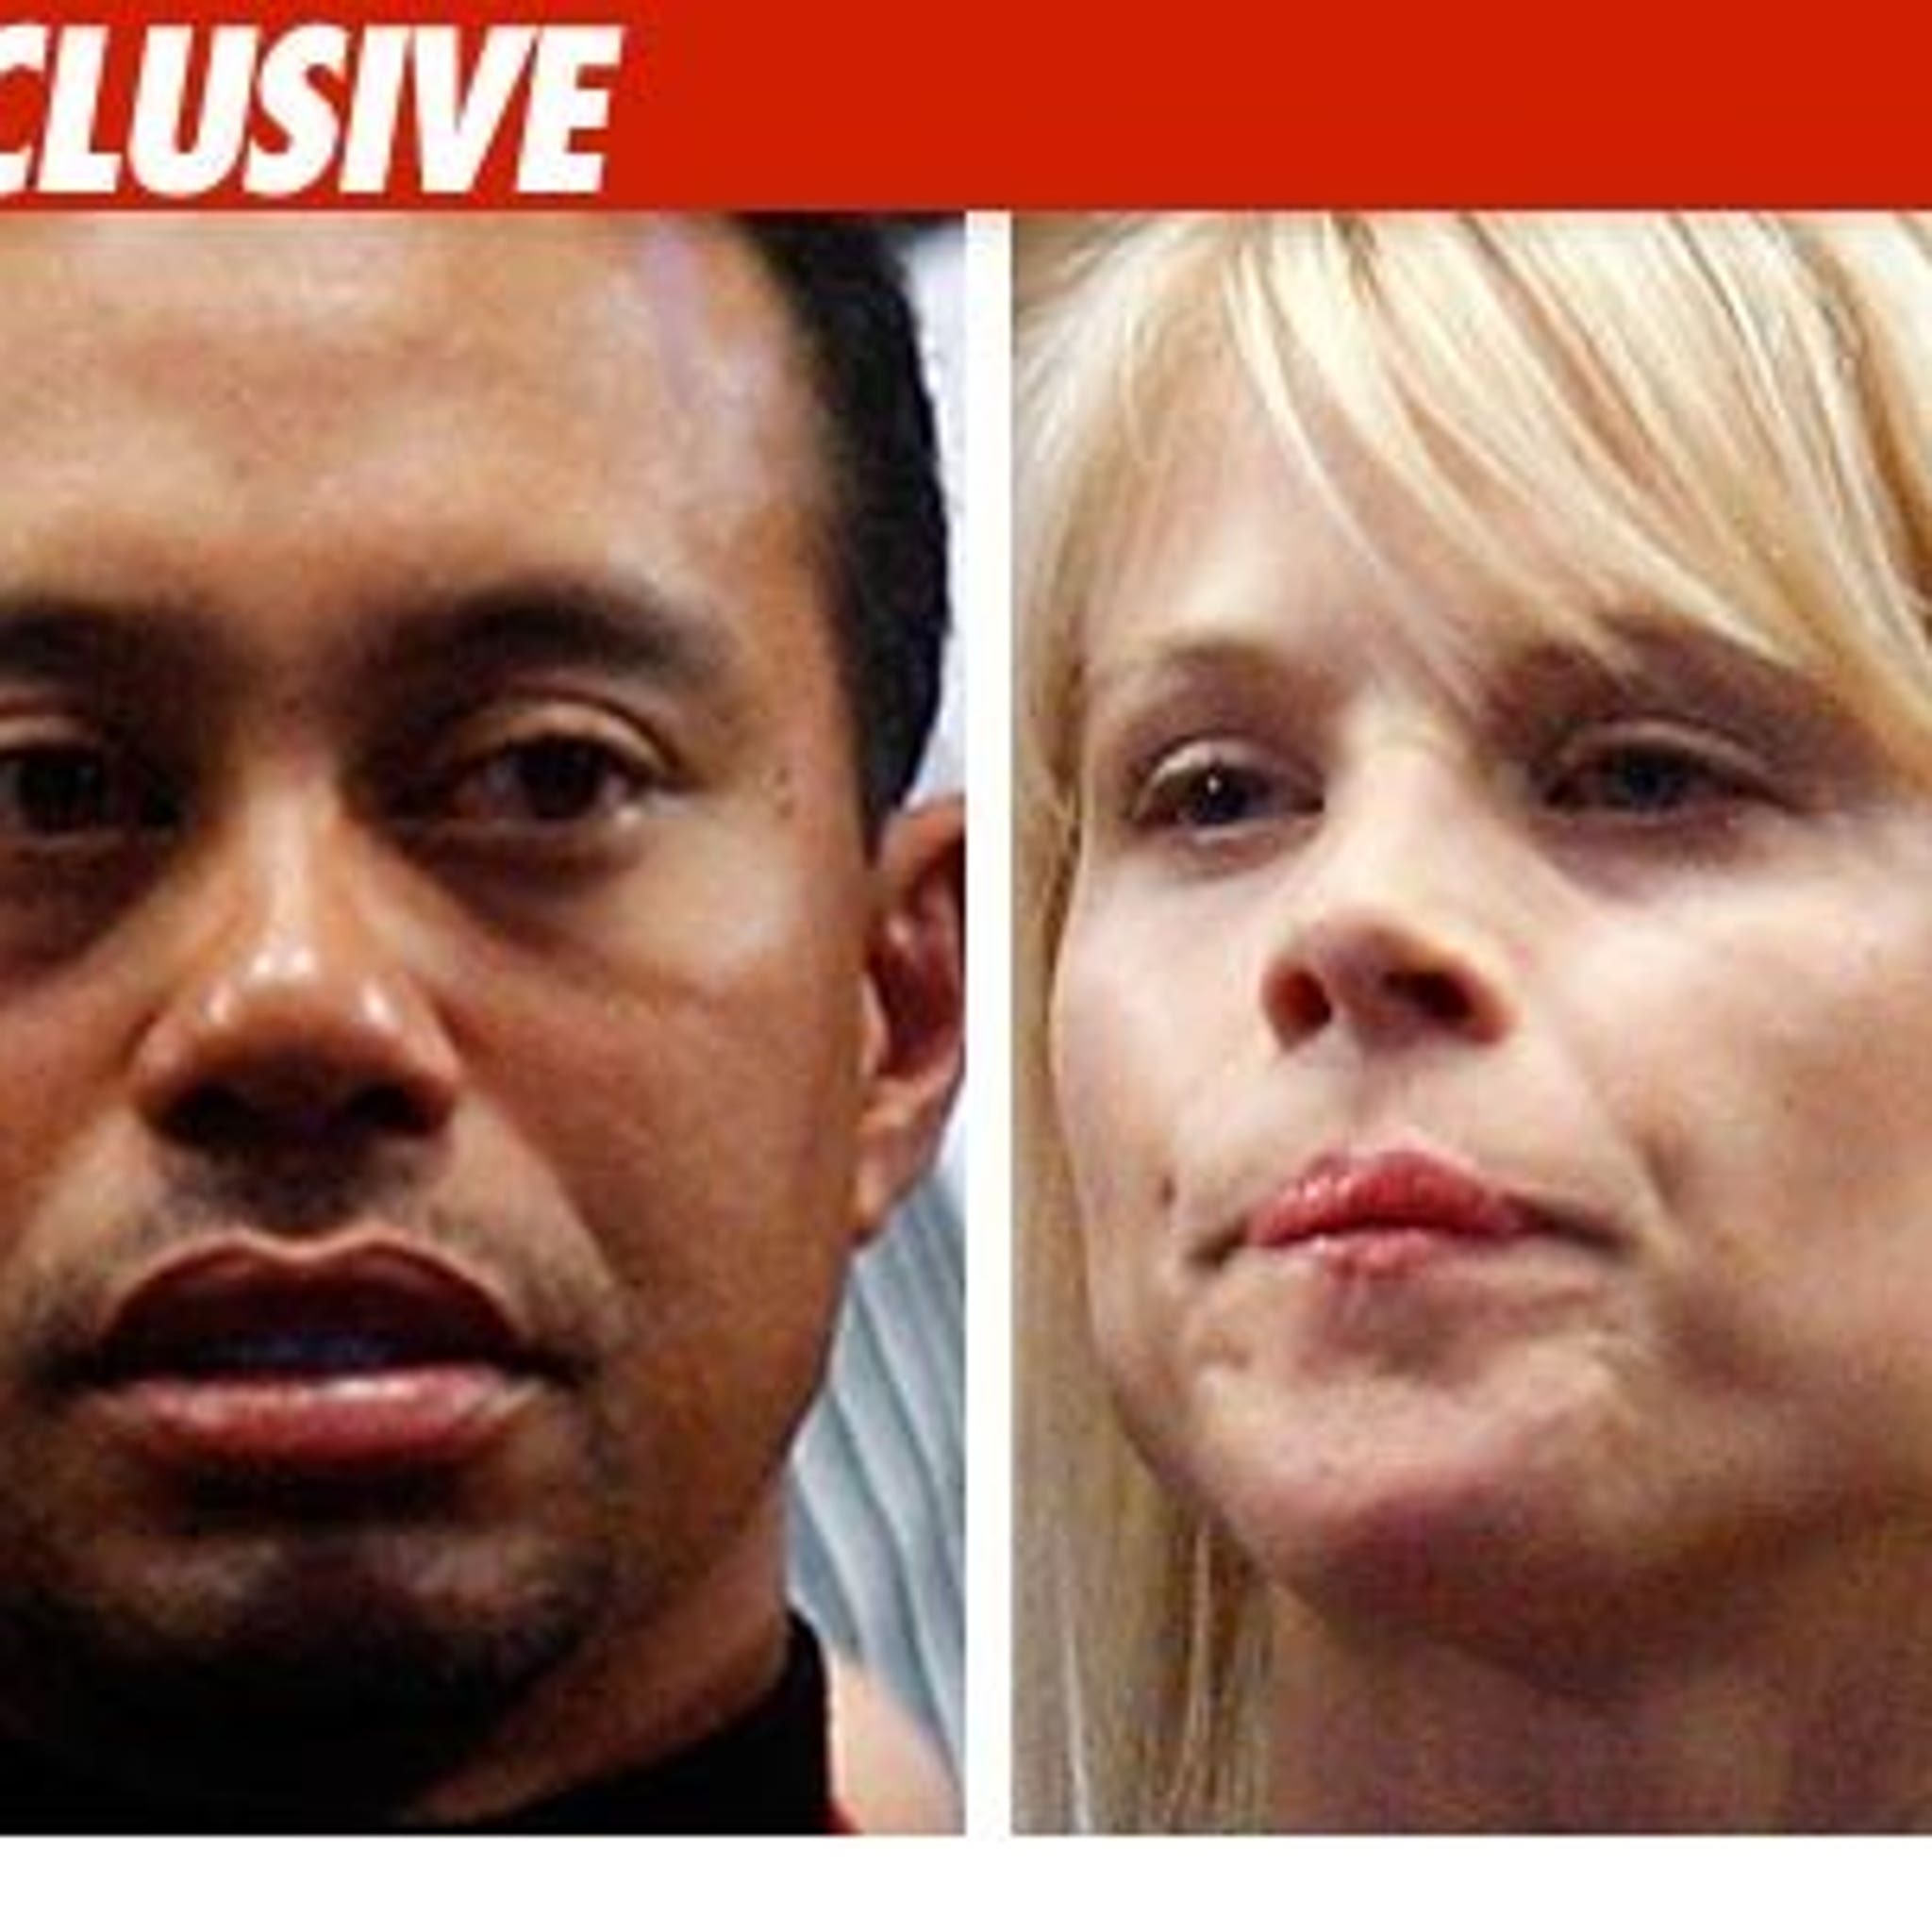 Tiger Woods Injuries Caused by Wife, Not pic